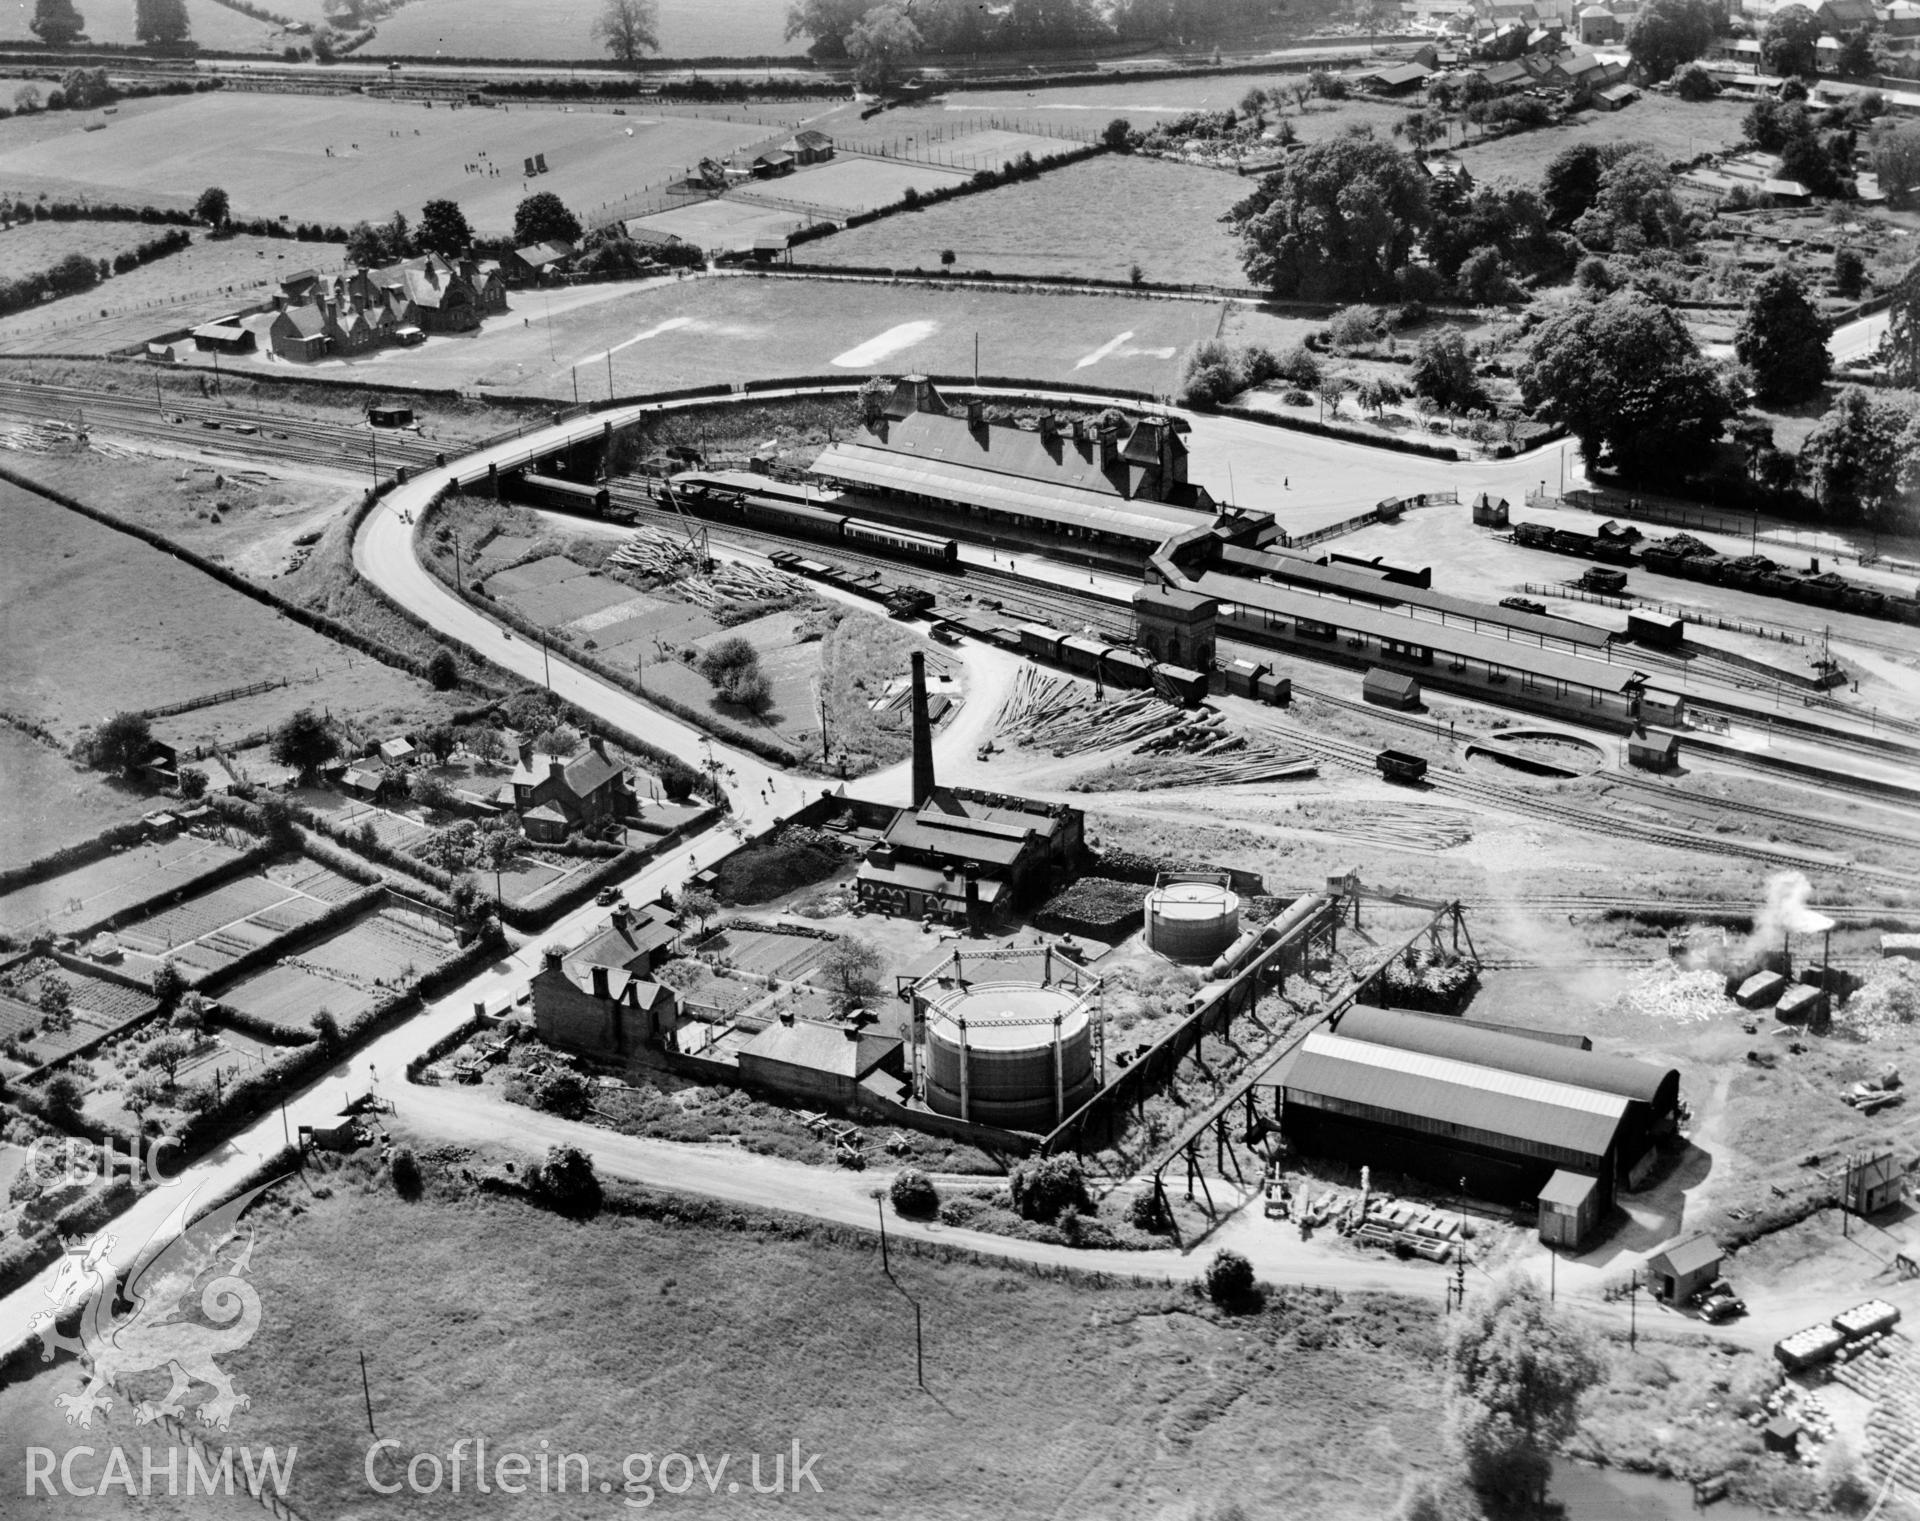 View of the Severn Valley Gas Co. works at Welshpool, also showing railway station with trains and the County school. Oblique aerial photograph, 5?x4? BW glass plate.